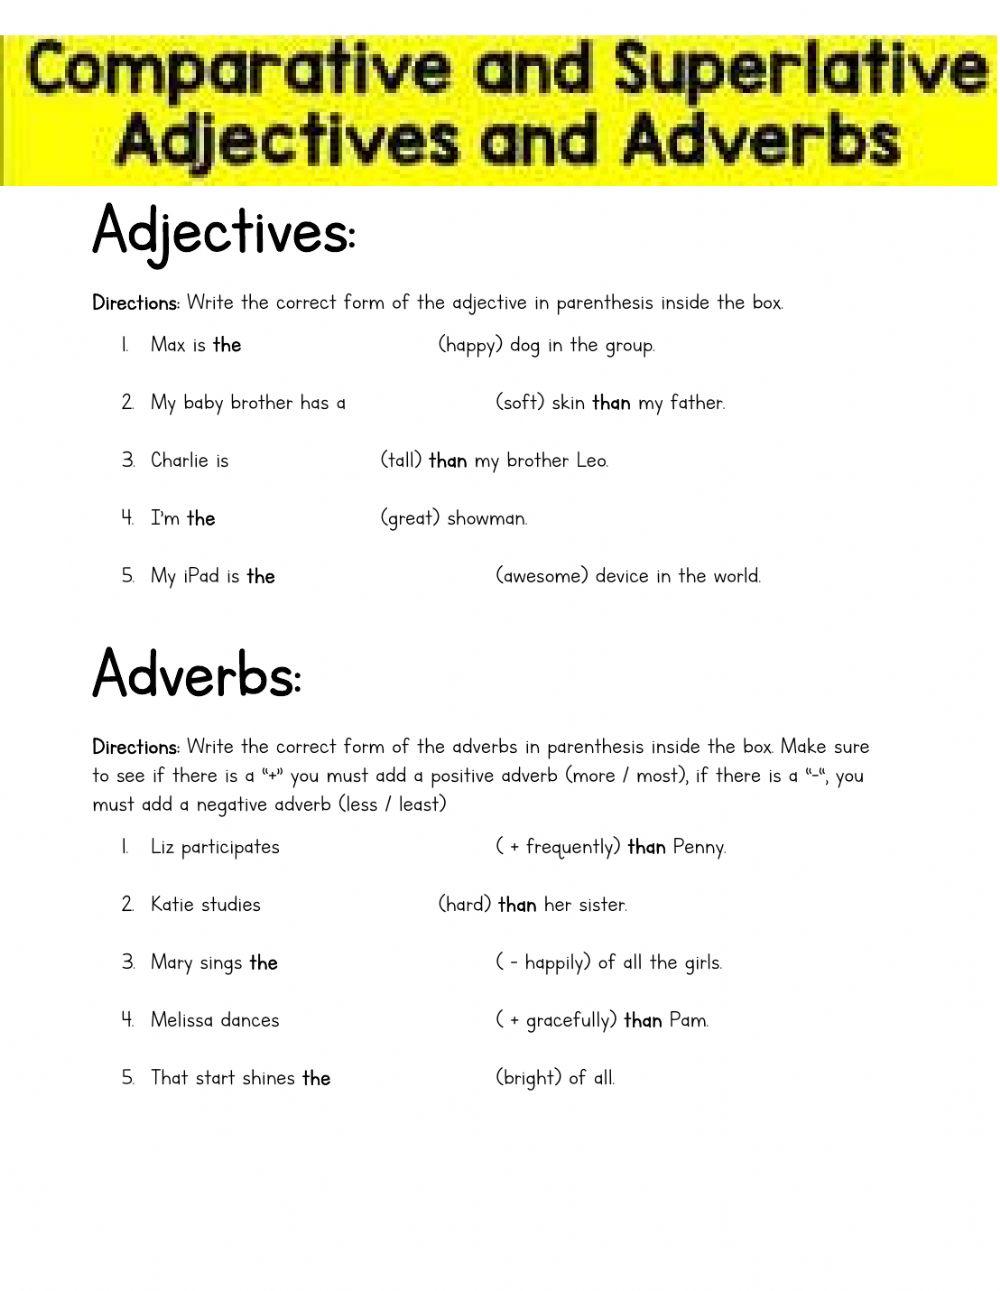 Comparative and Superlative Adjectives and Adverbs (4th grade)